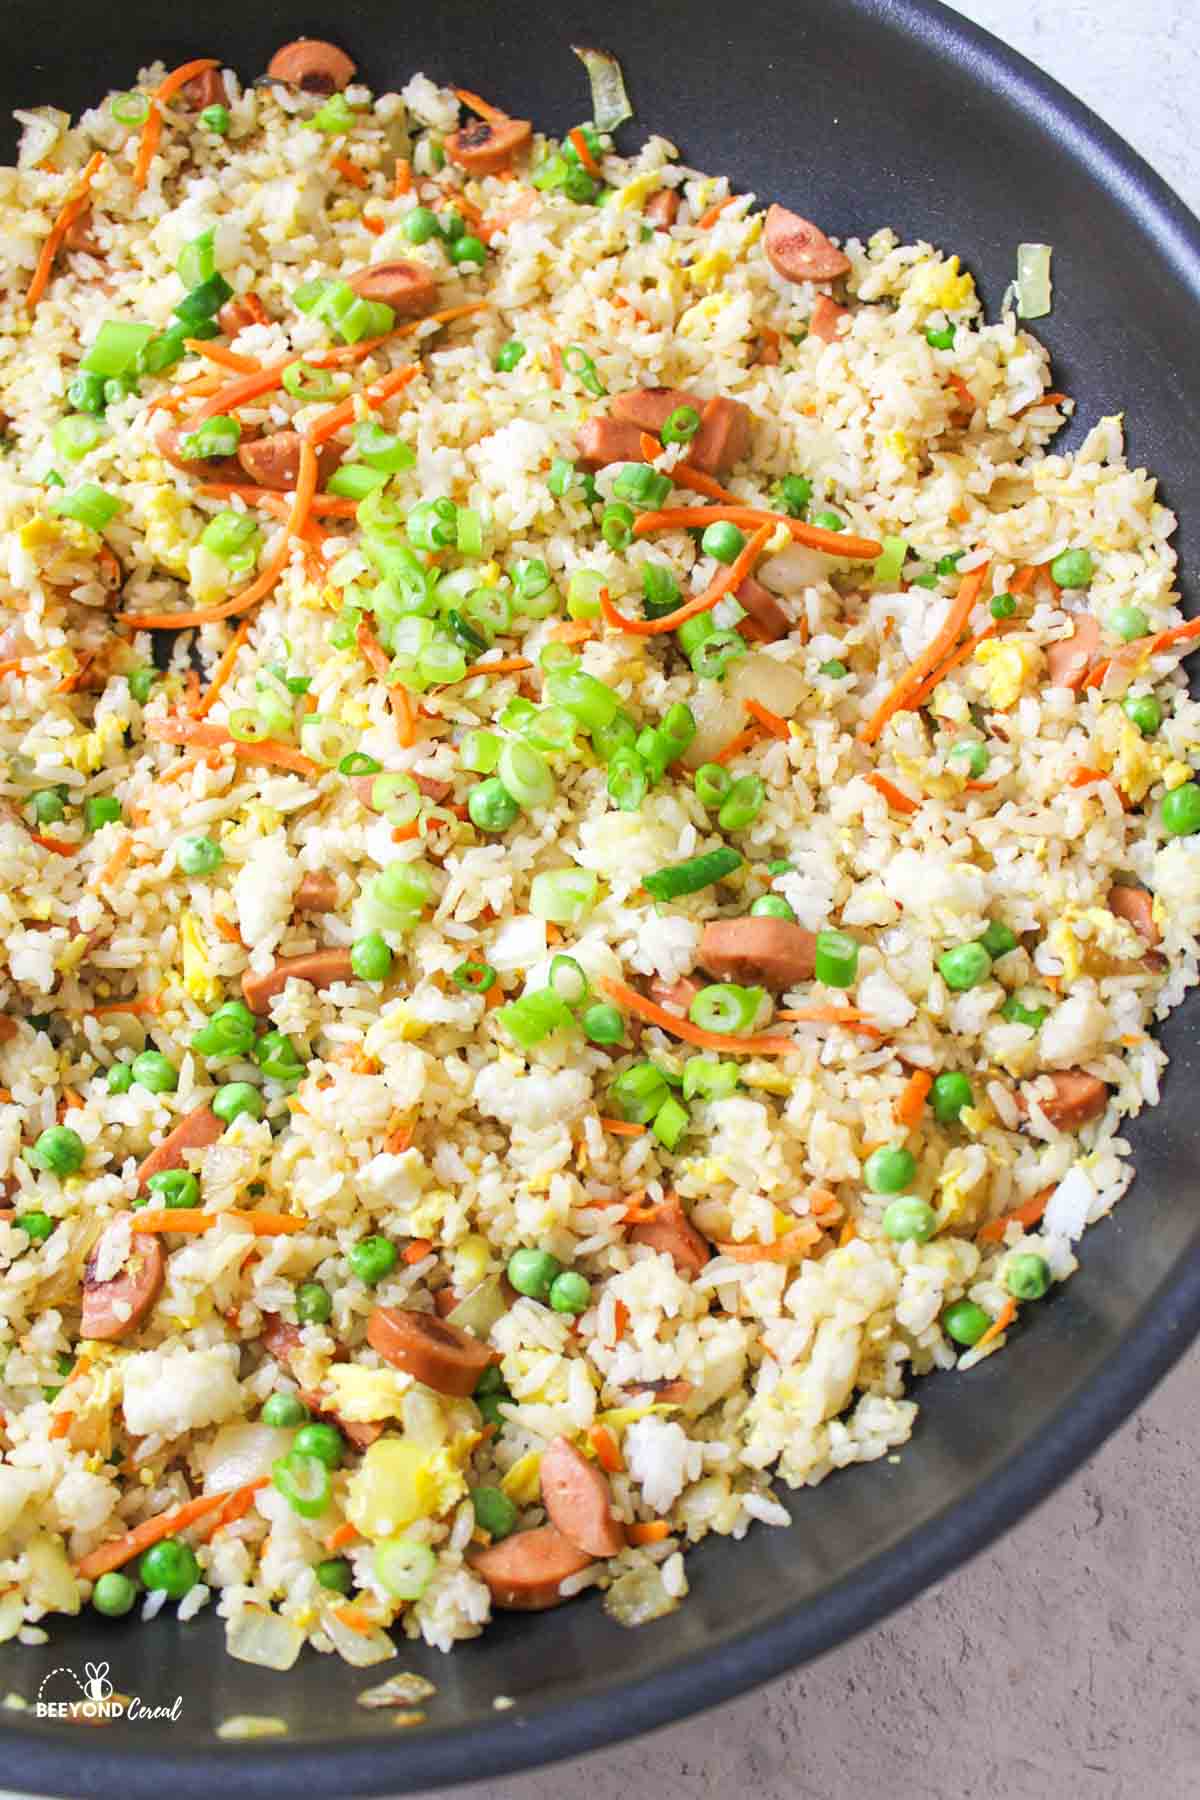 hot dog fried rice in a large black wok.